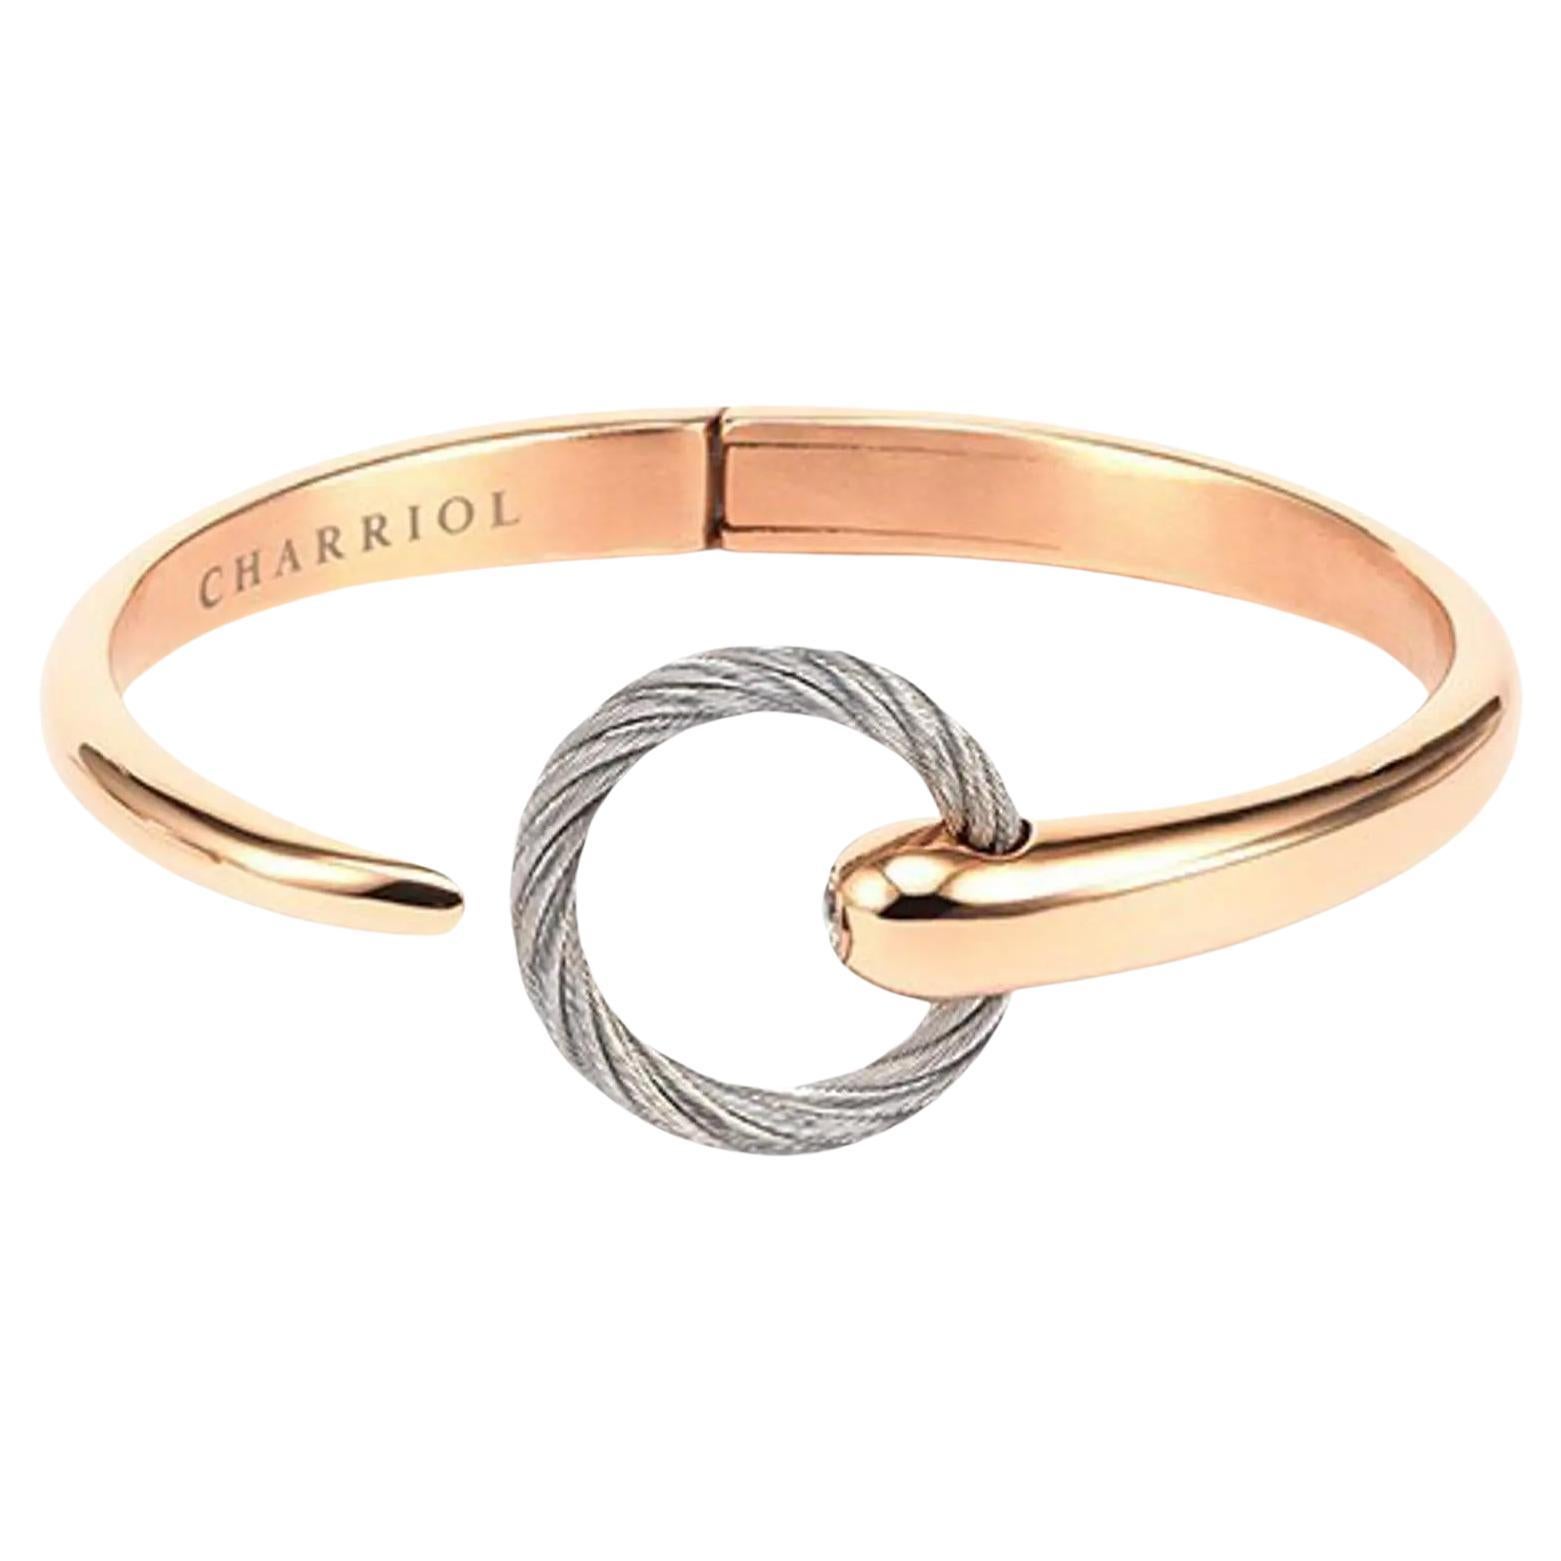 Charriol Infinity Zen Rose Gold PVD Steel Cable Bangle 04-102-1232-0 Size M